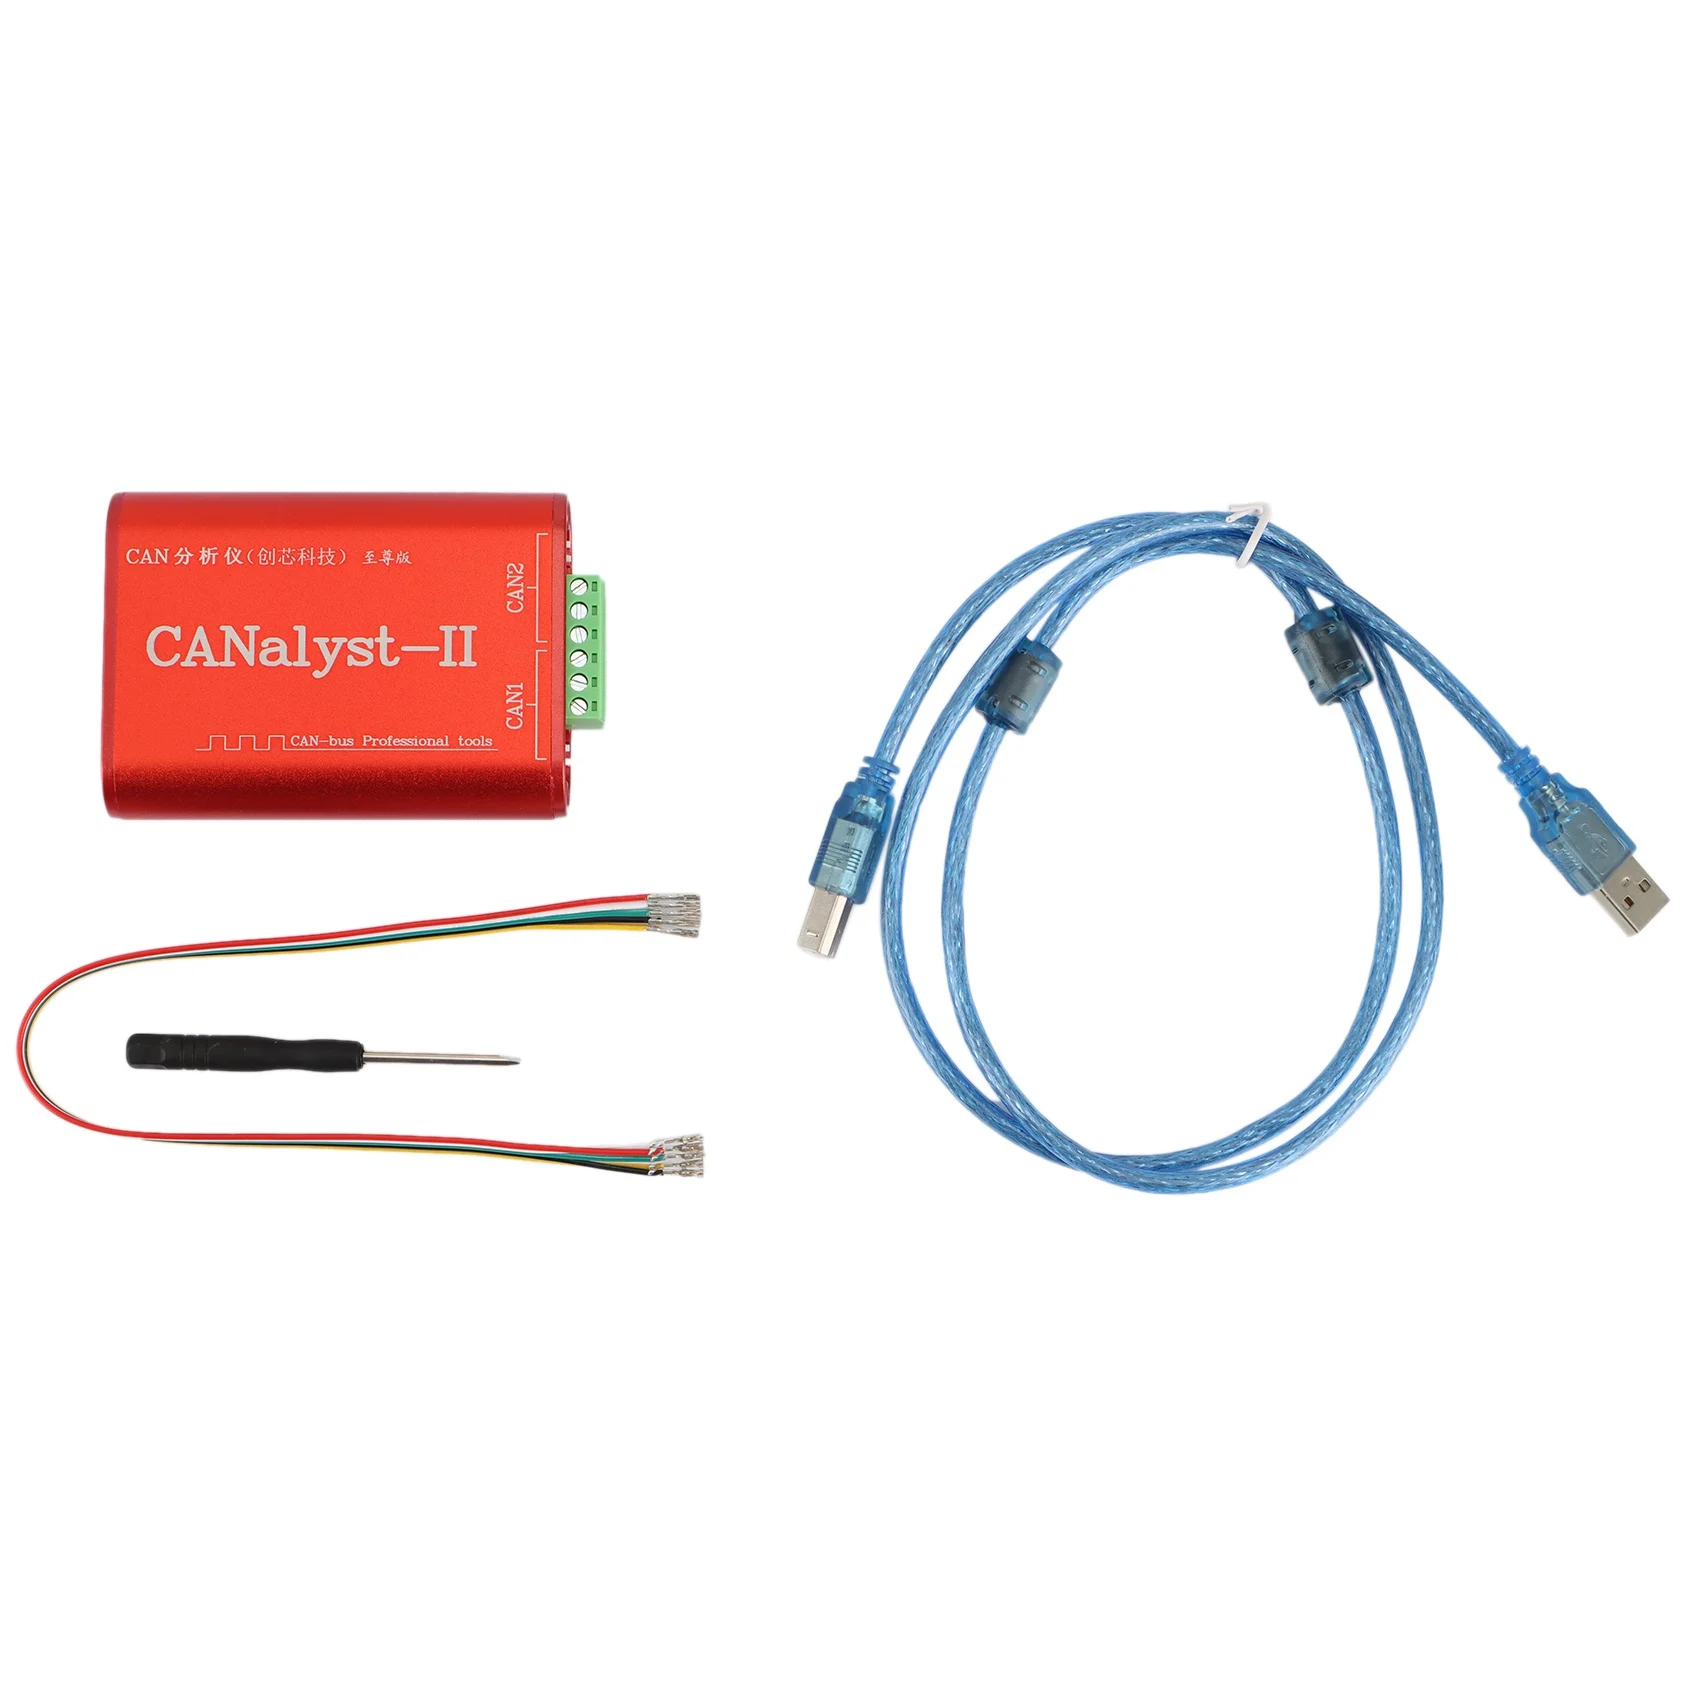 can-analyzer-can-bus-converter-adapter-canalyst-ii-analisador-usb-para-can-compativel-com-zlg-usb-para-can